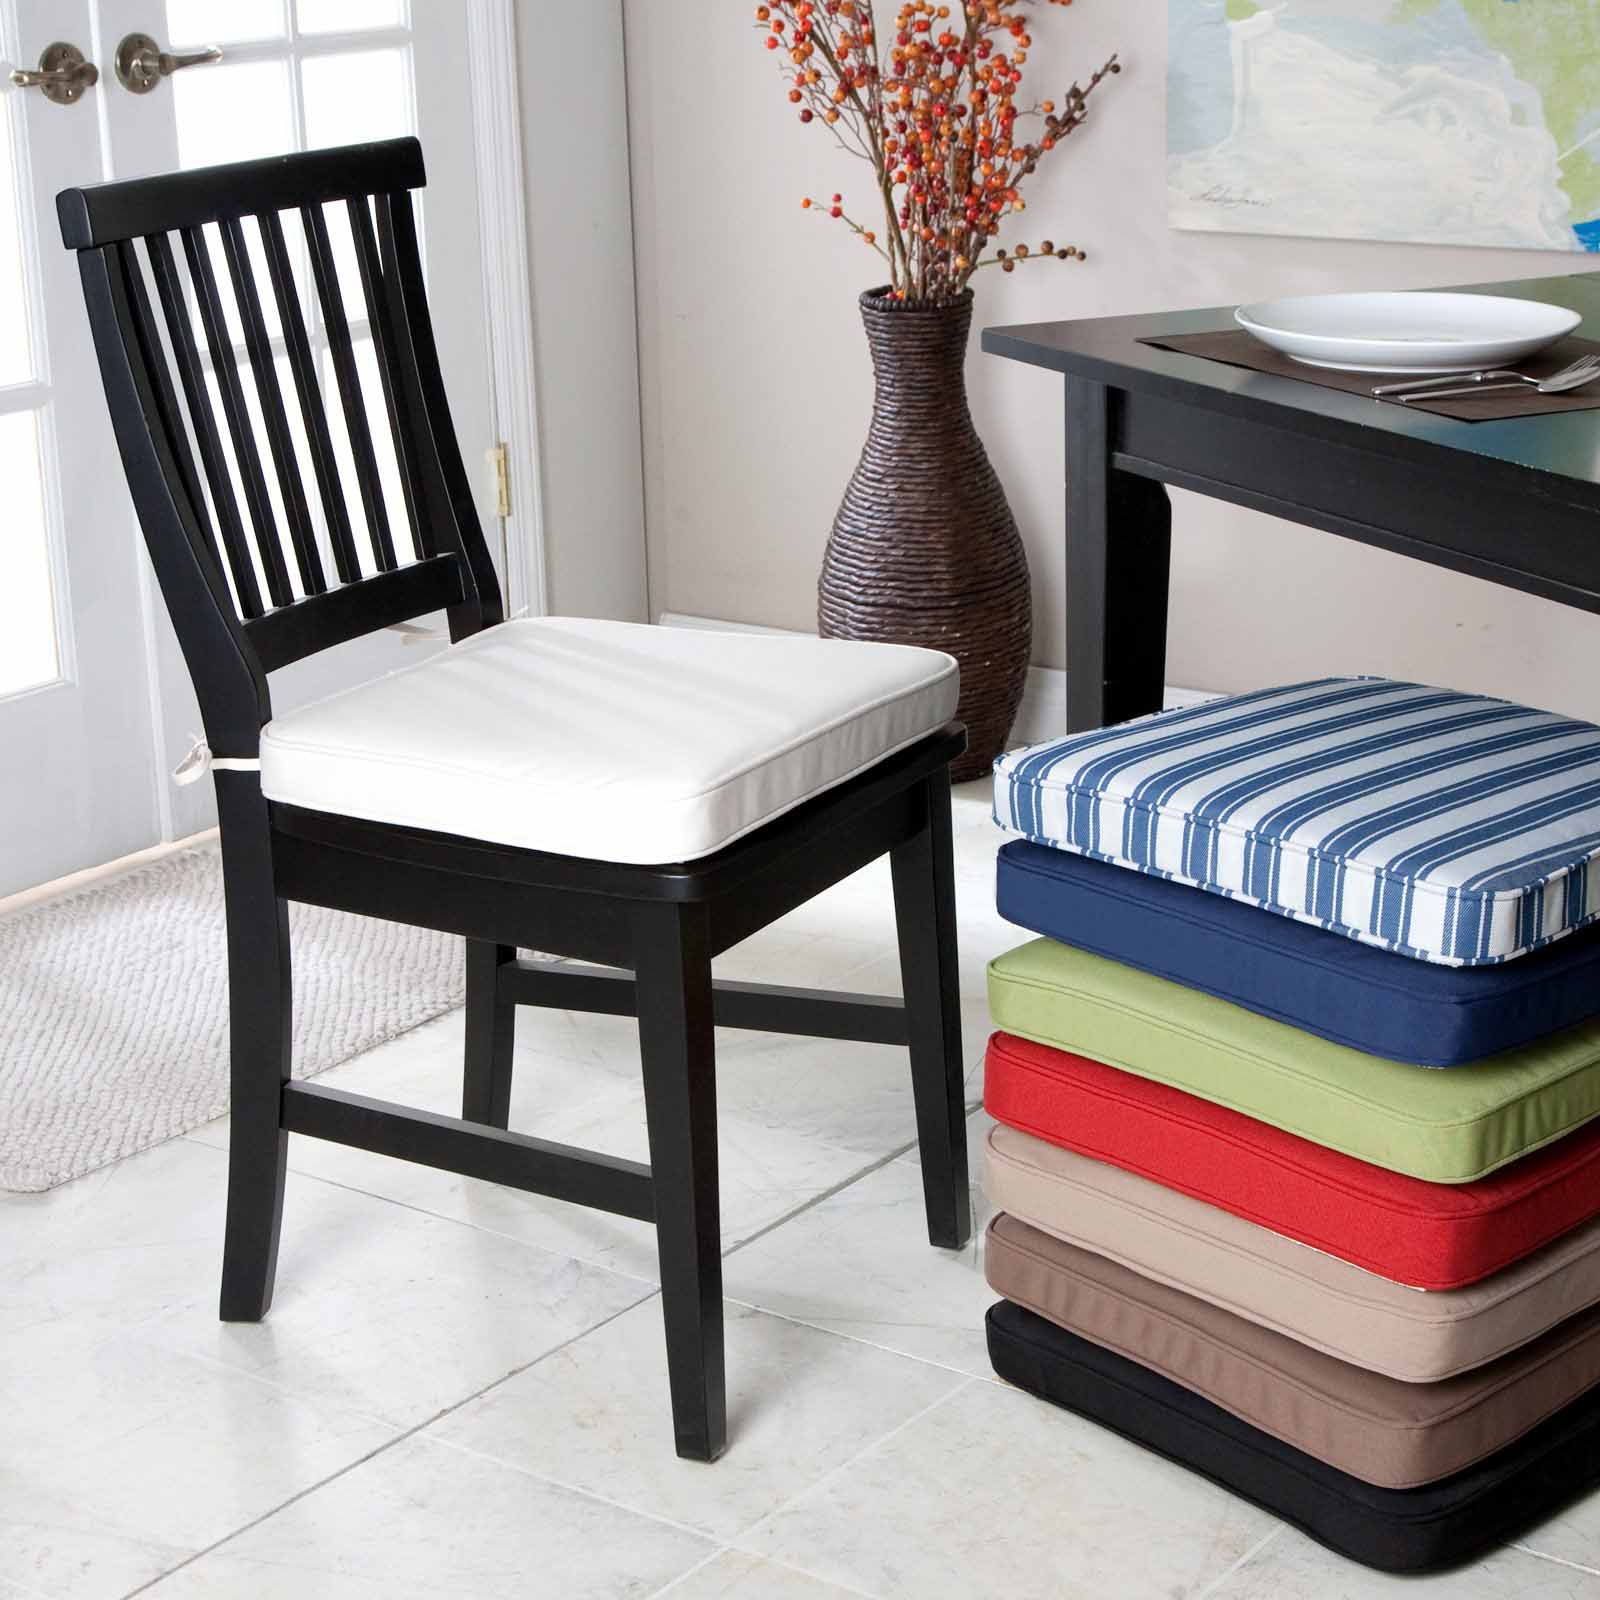 Sweet Seats: How to Reupholster Dining Chair Cushions